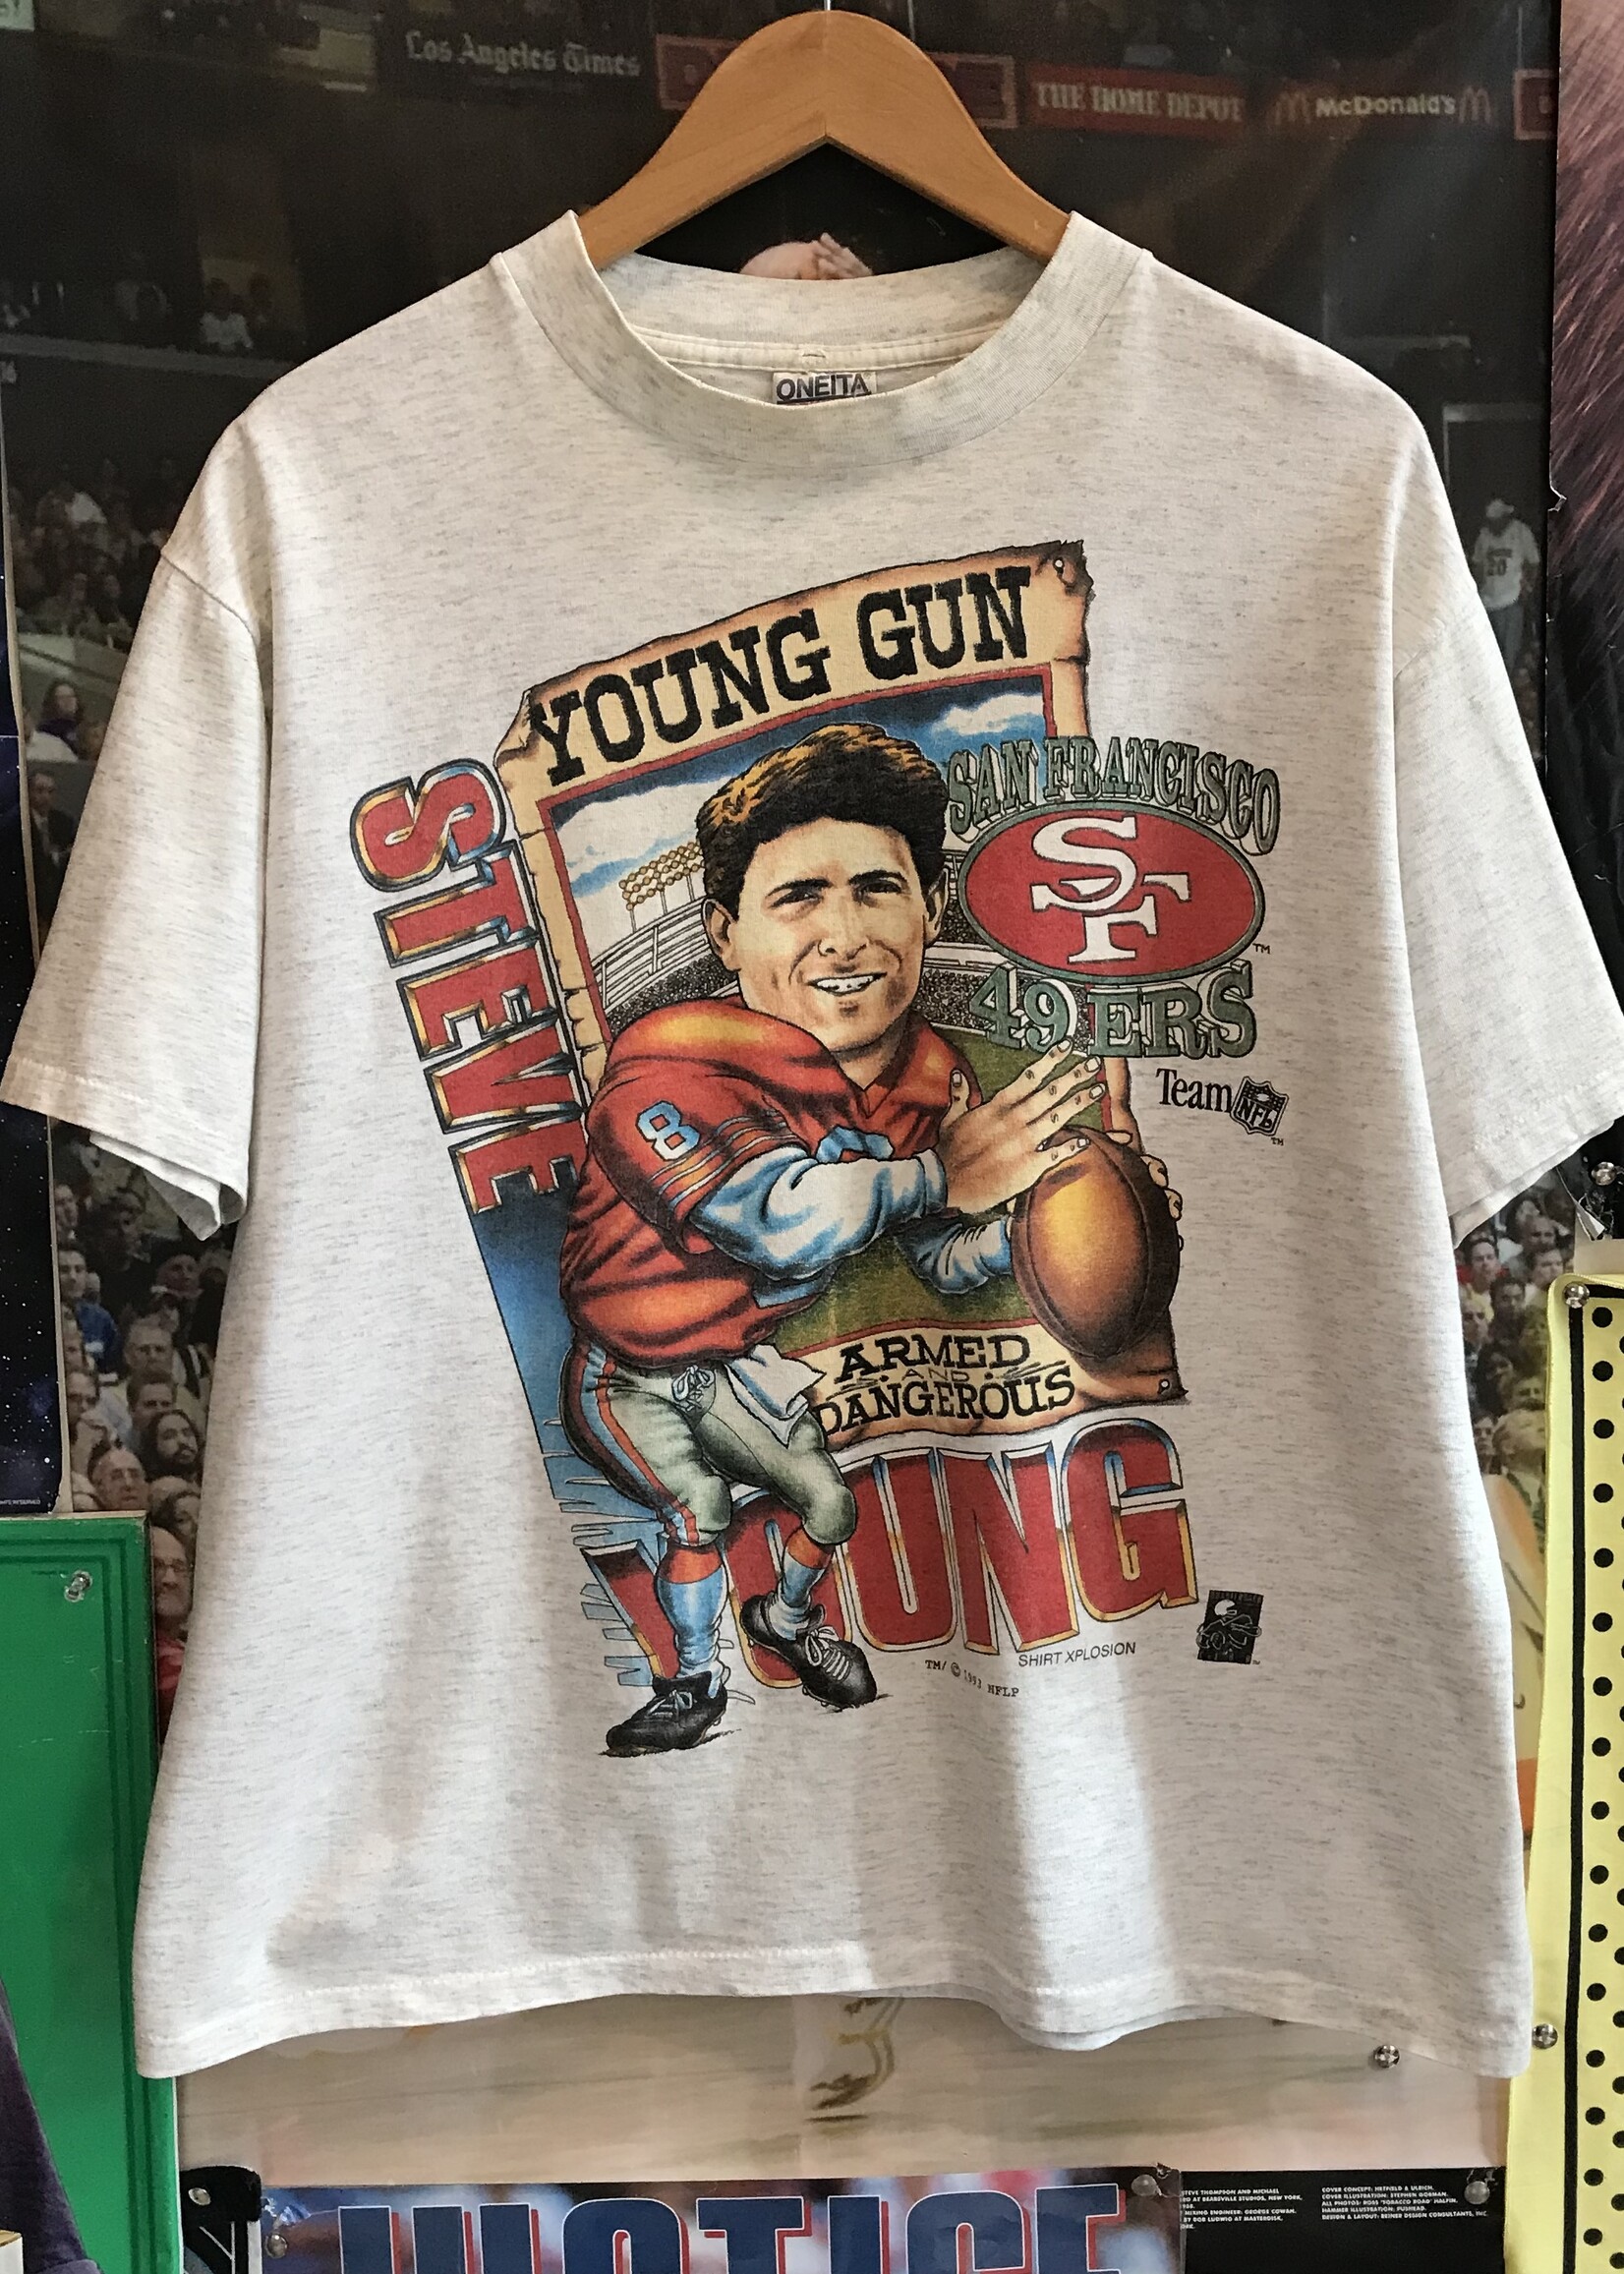 11136	1993 armed and dangerous steve young tee sz. L